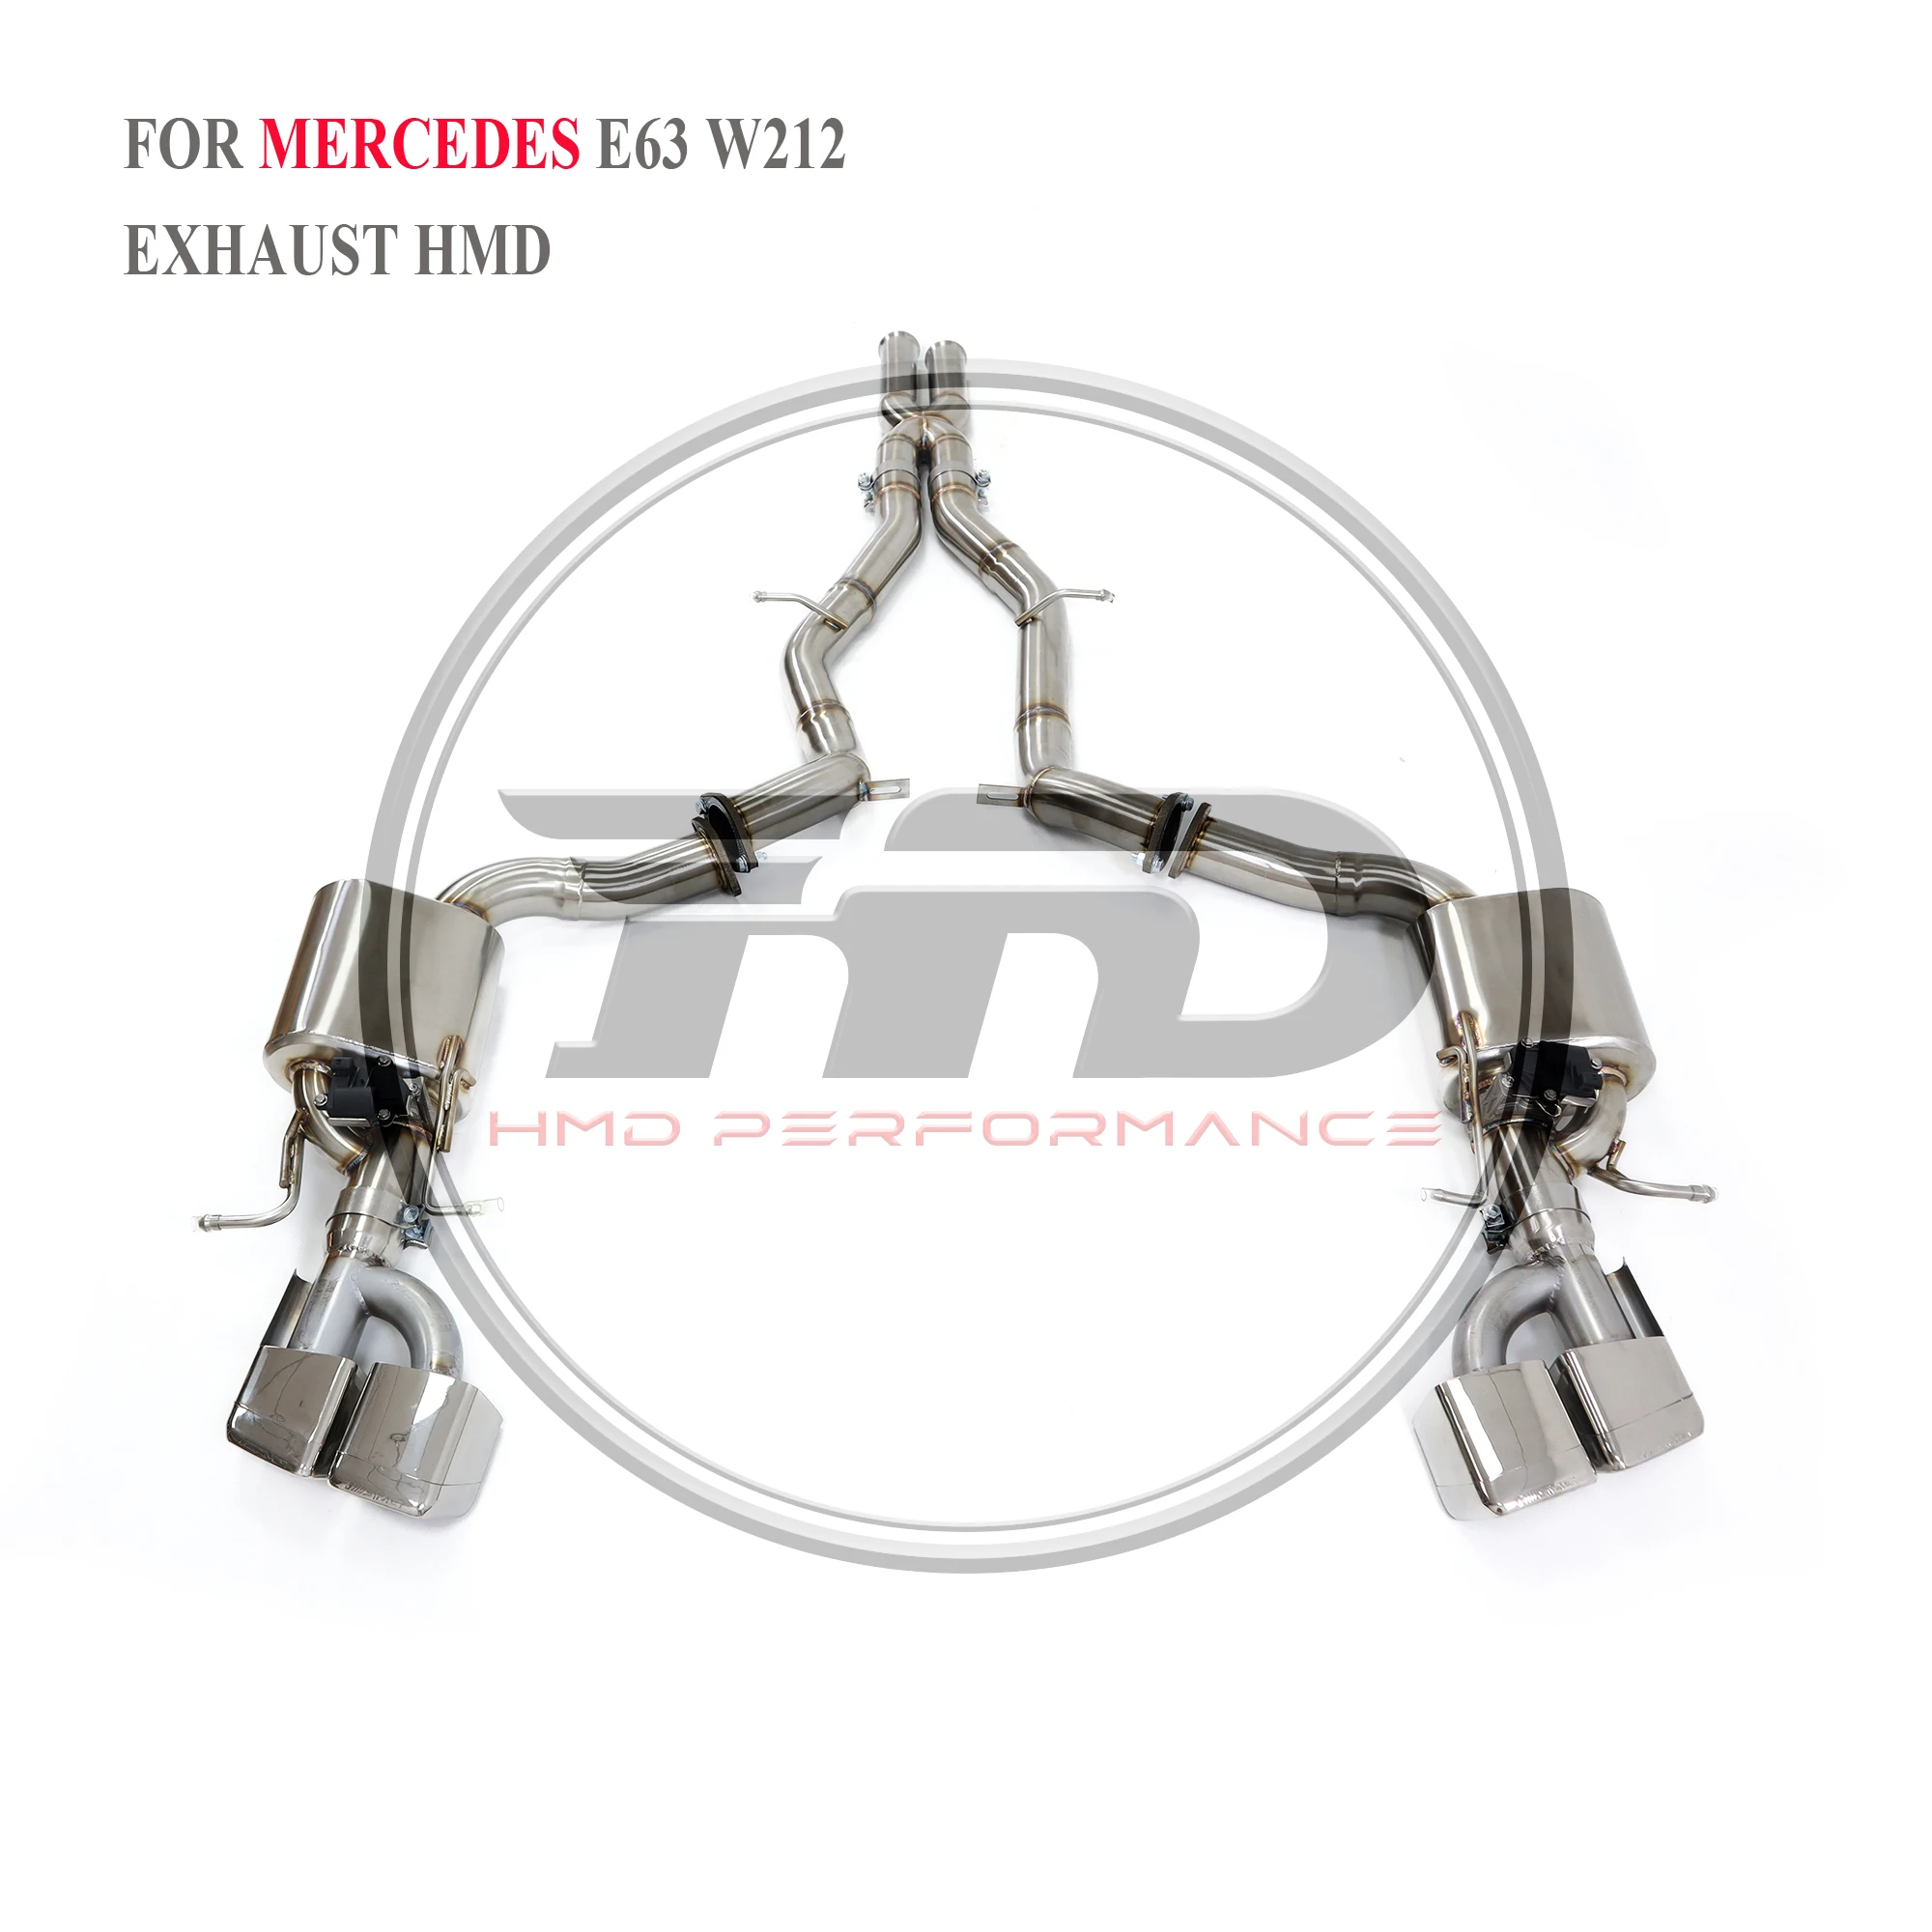 

HMD Stainless steel Exhaust System Performance Catback for Mercedes Benz AMG E63 E300 W211 Muffler With Valve